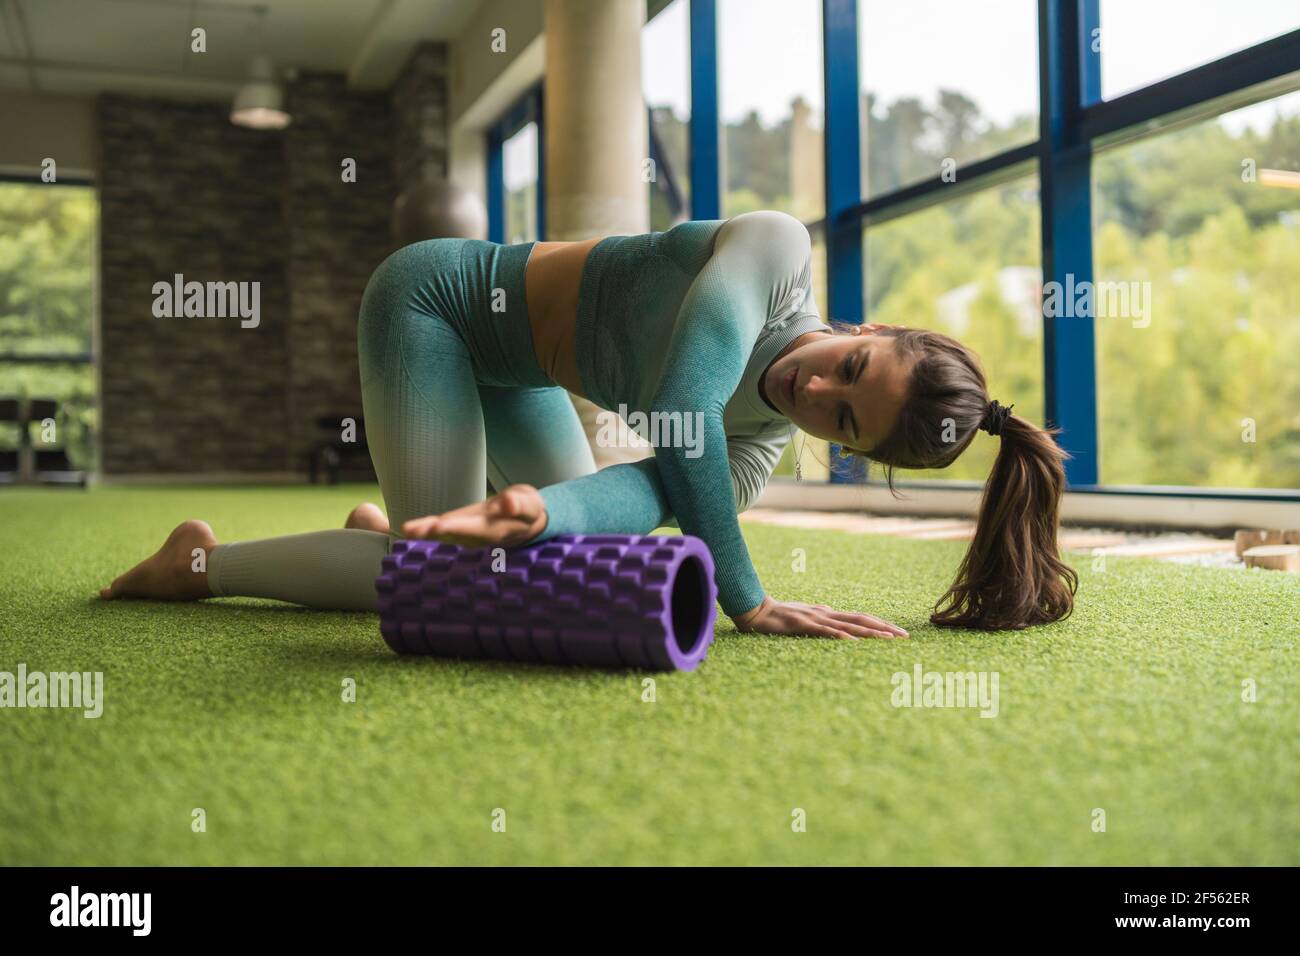 Young sportswoman exercising on foam roller at health club Stock Photo